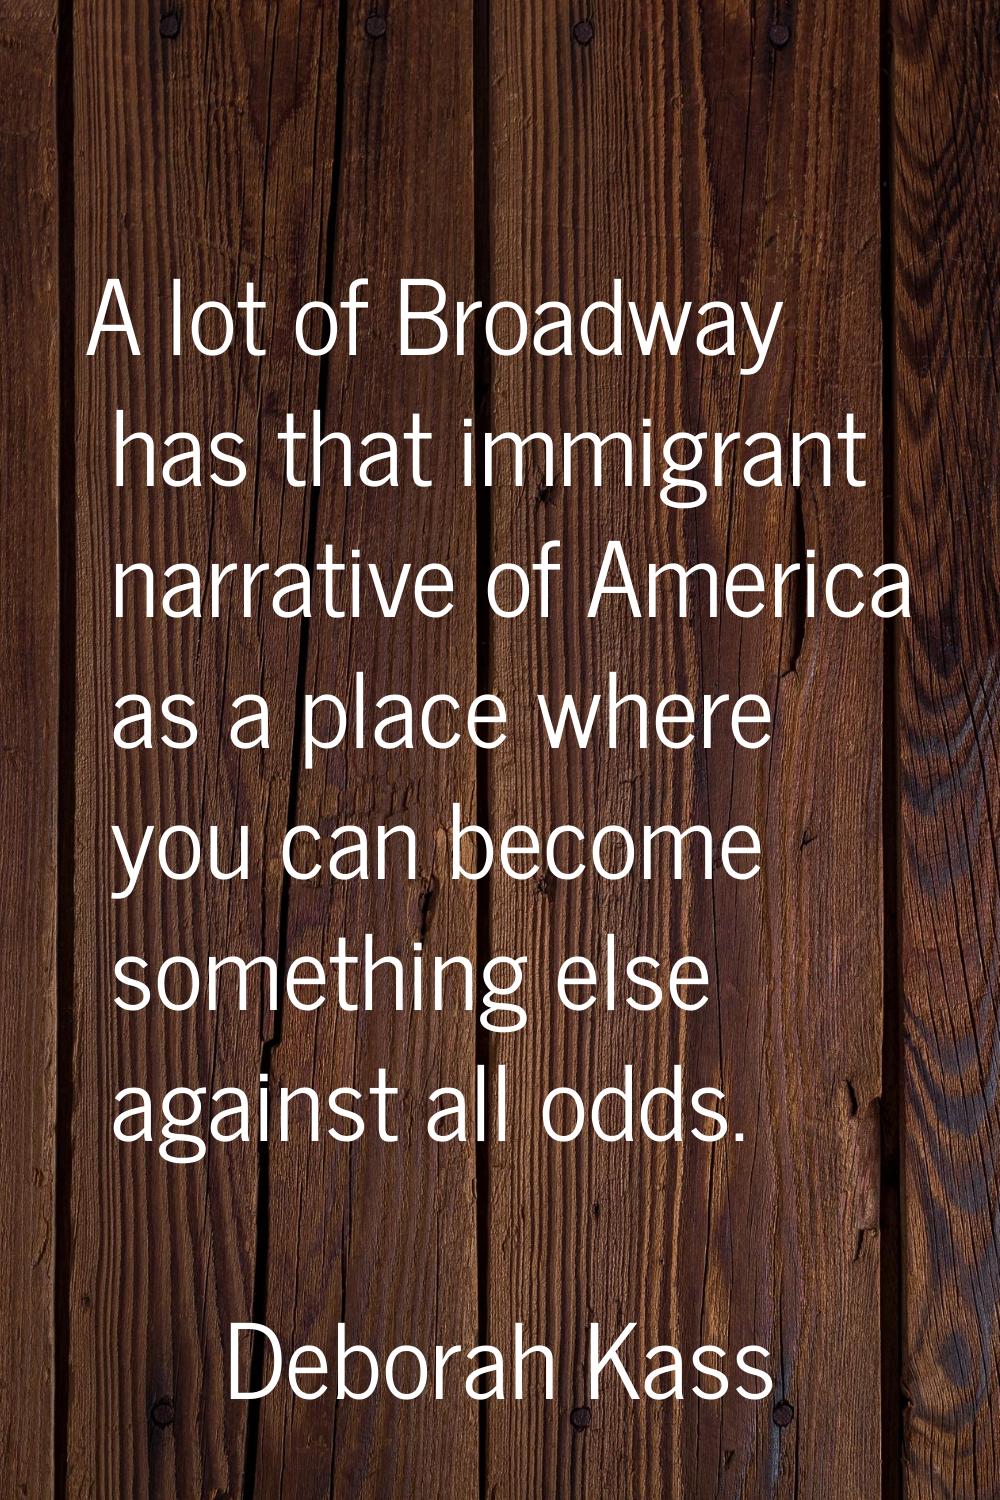 A lot of Broadway has that immigrant narrative of America as a place where you can become something